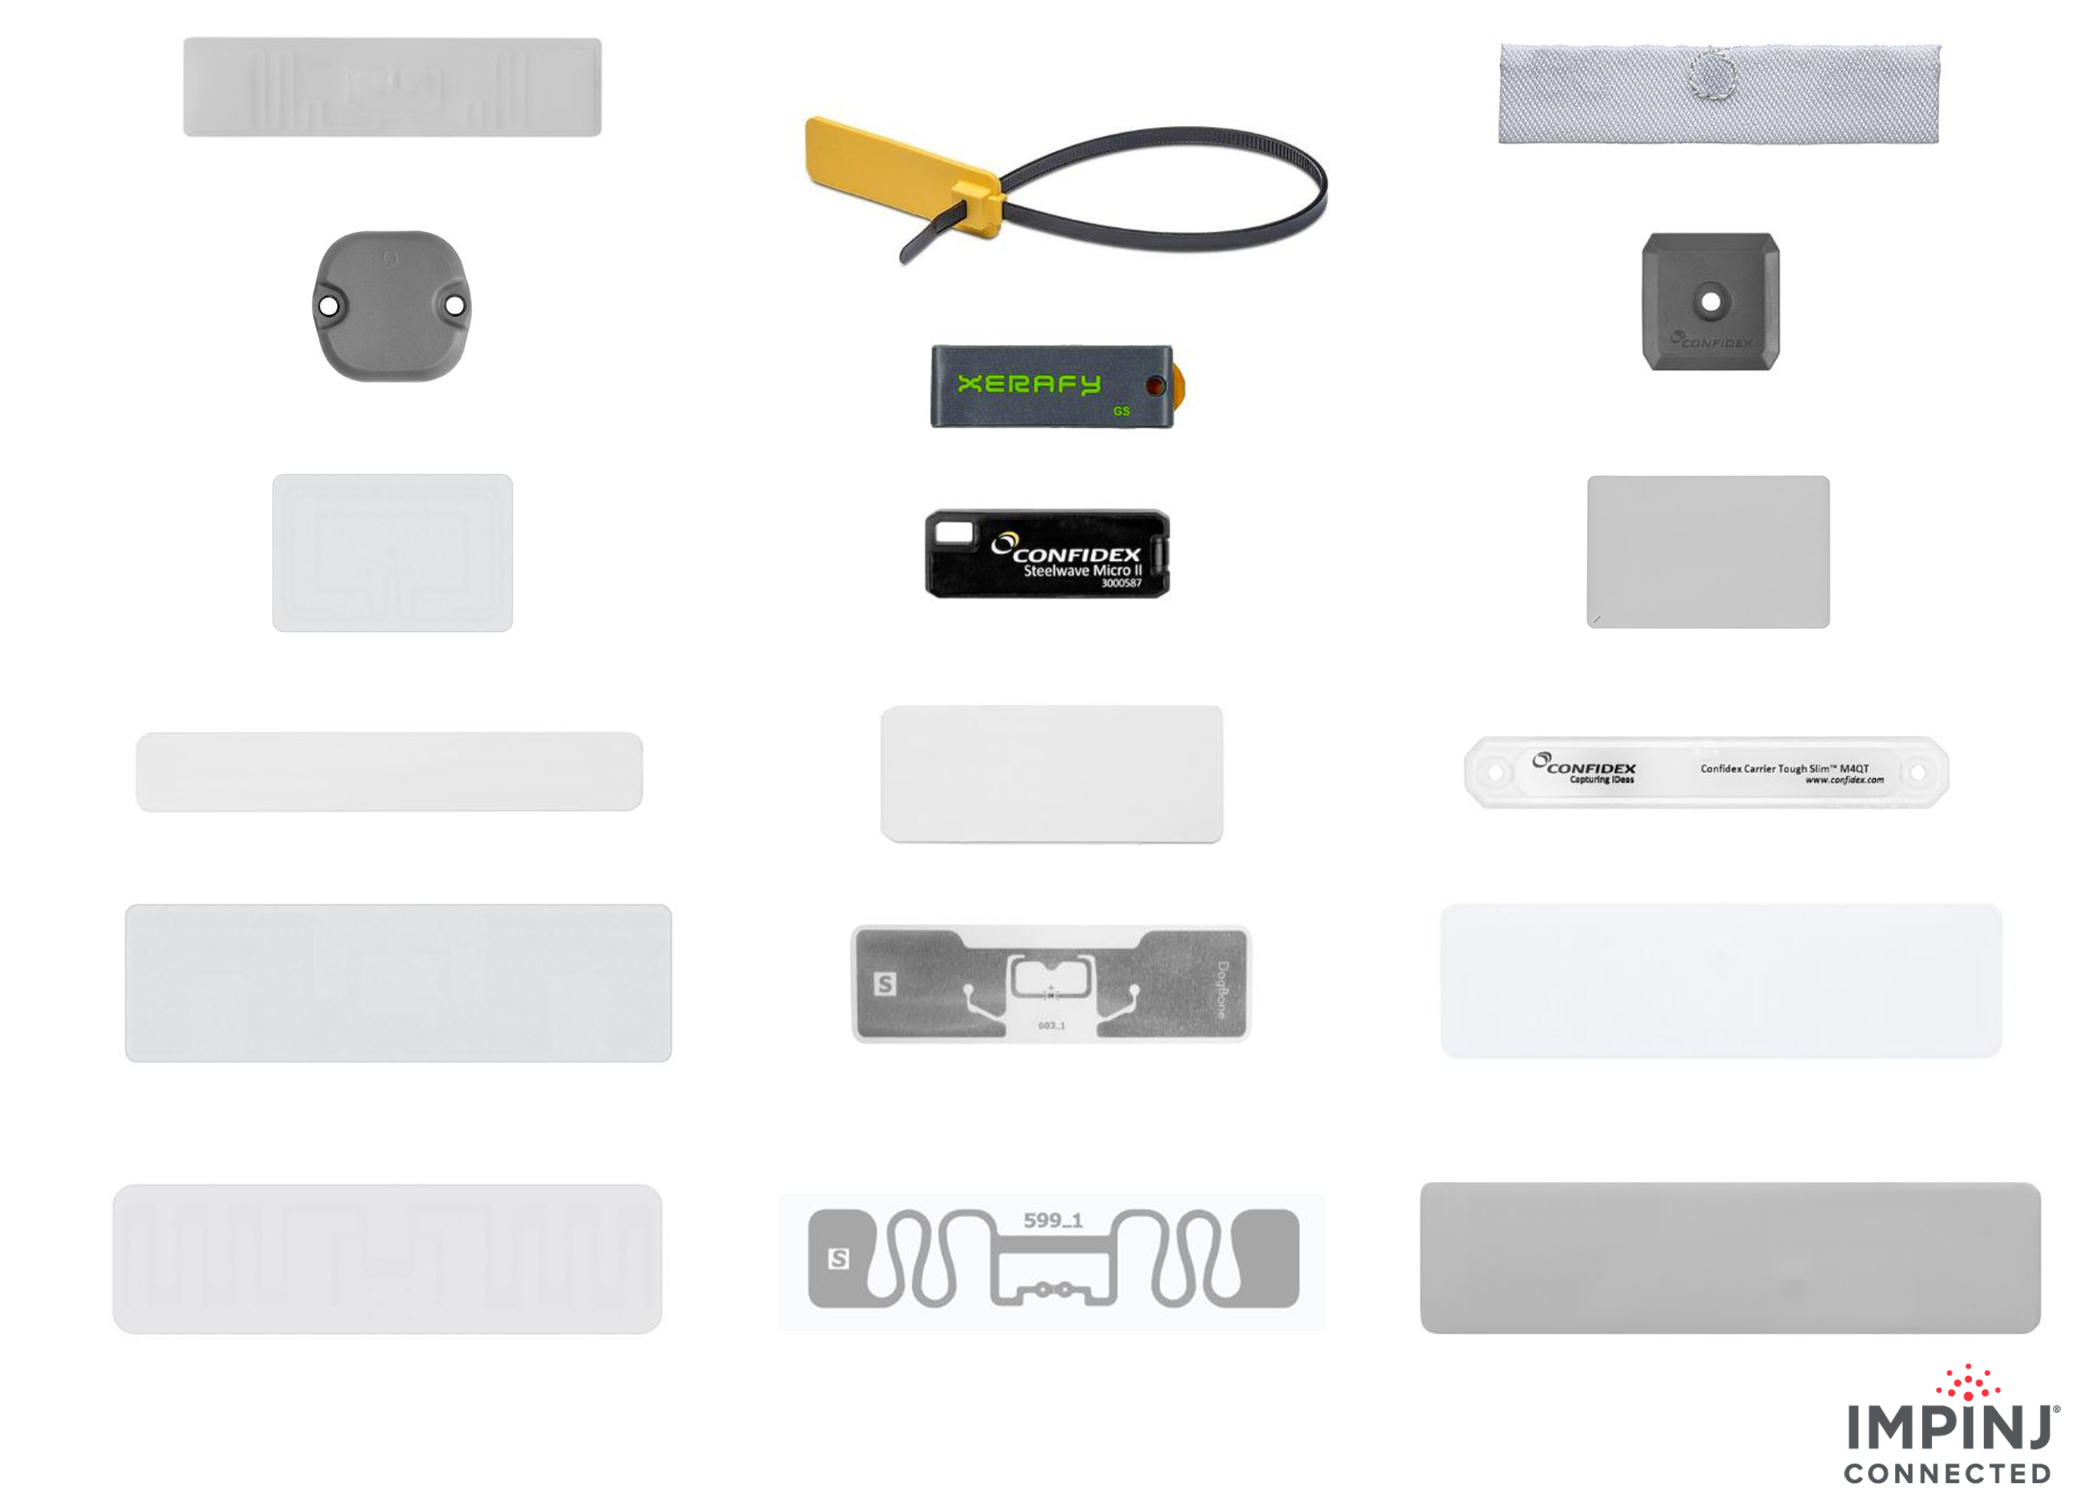 Buy NFC Tags, UHF RFID Tags, Barcodes and Hardware for Connected Things